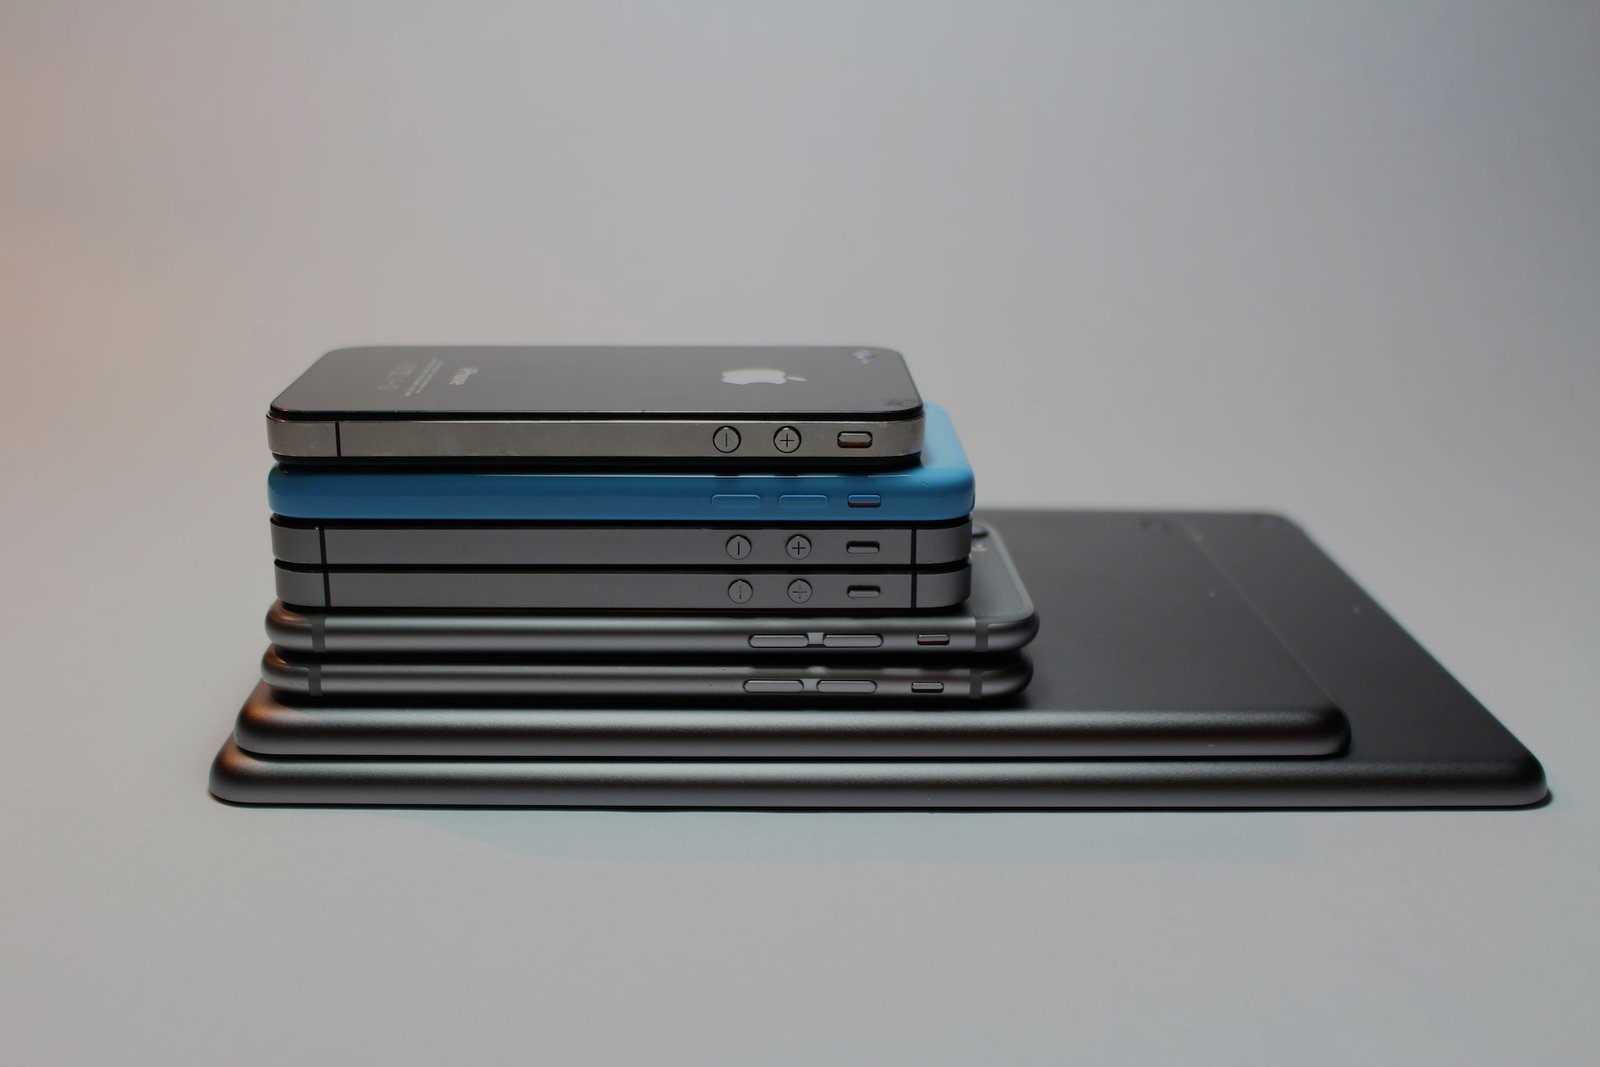 picture of ipads and iphones stacked on top of each other